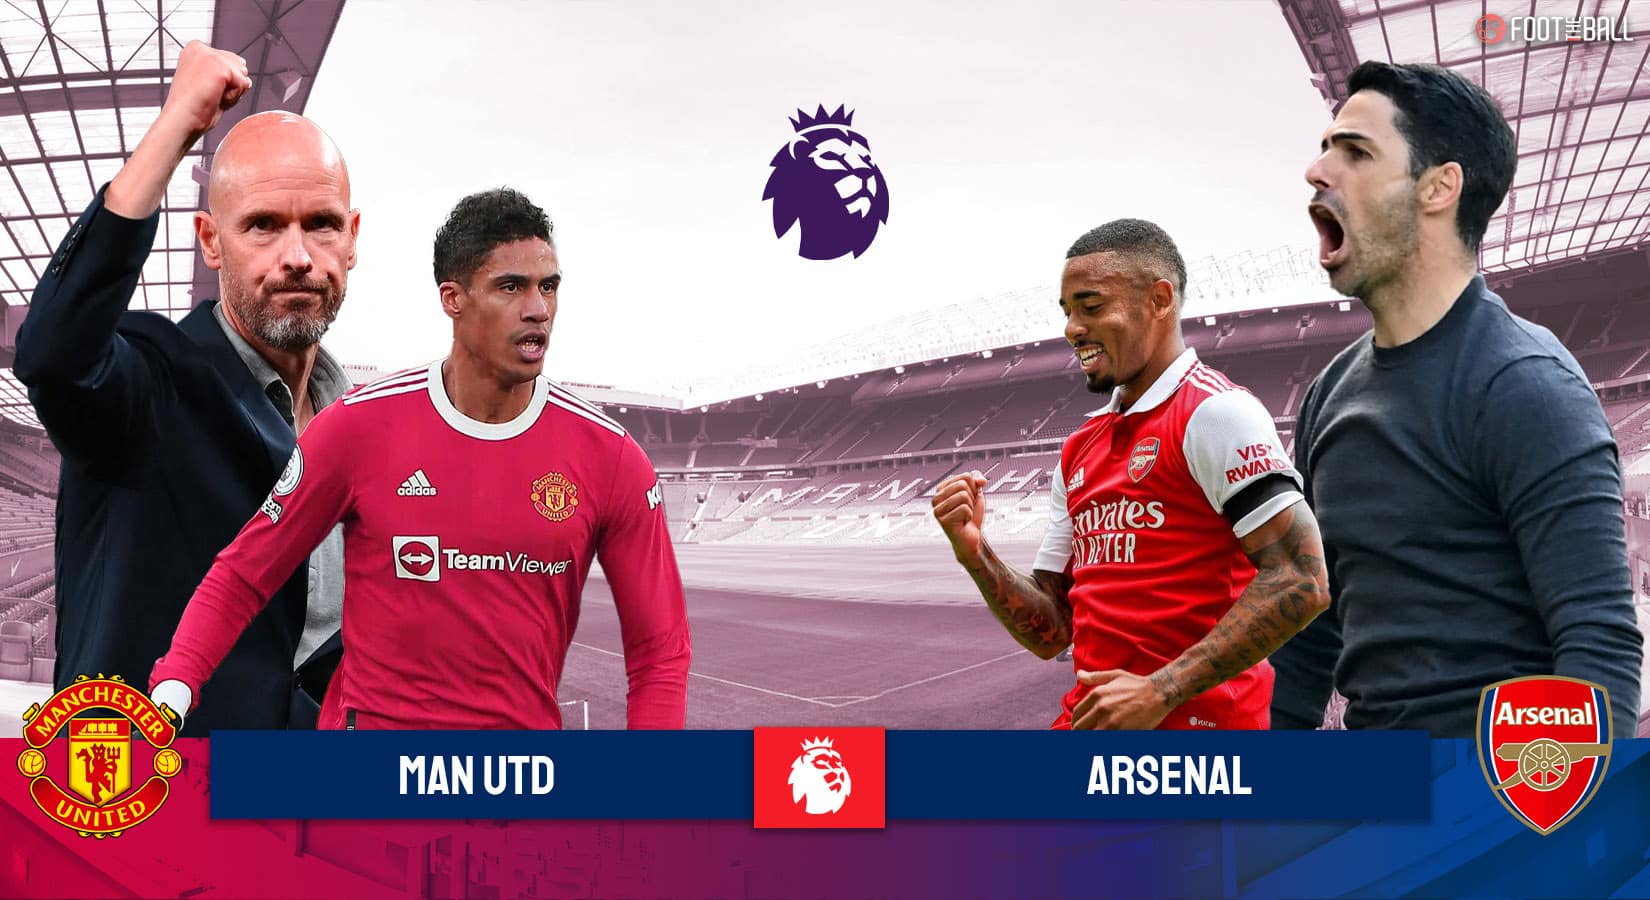 Manchester United vs Arsenal Predictions, Tips & Match Preview